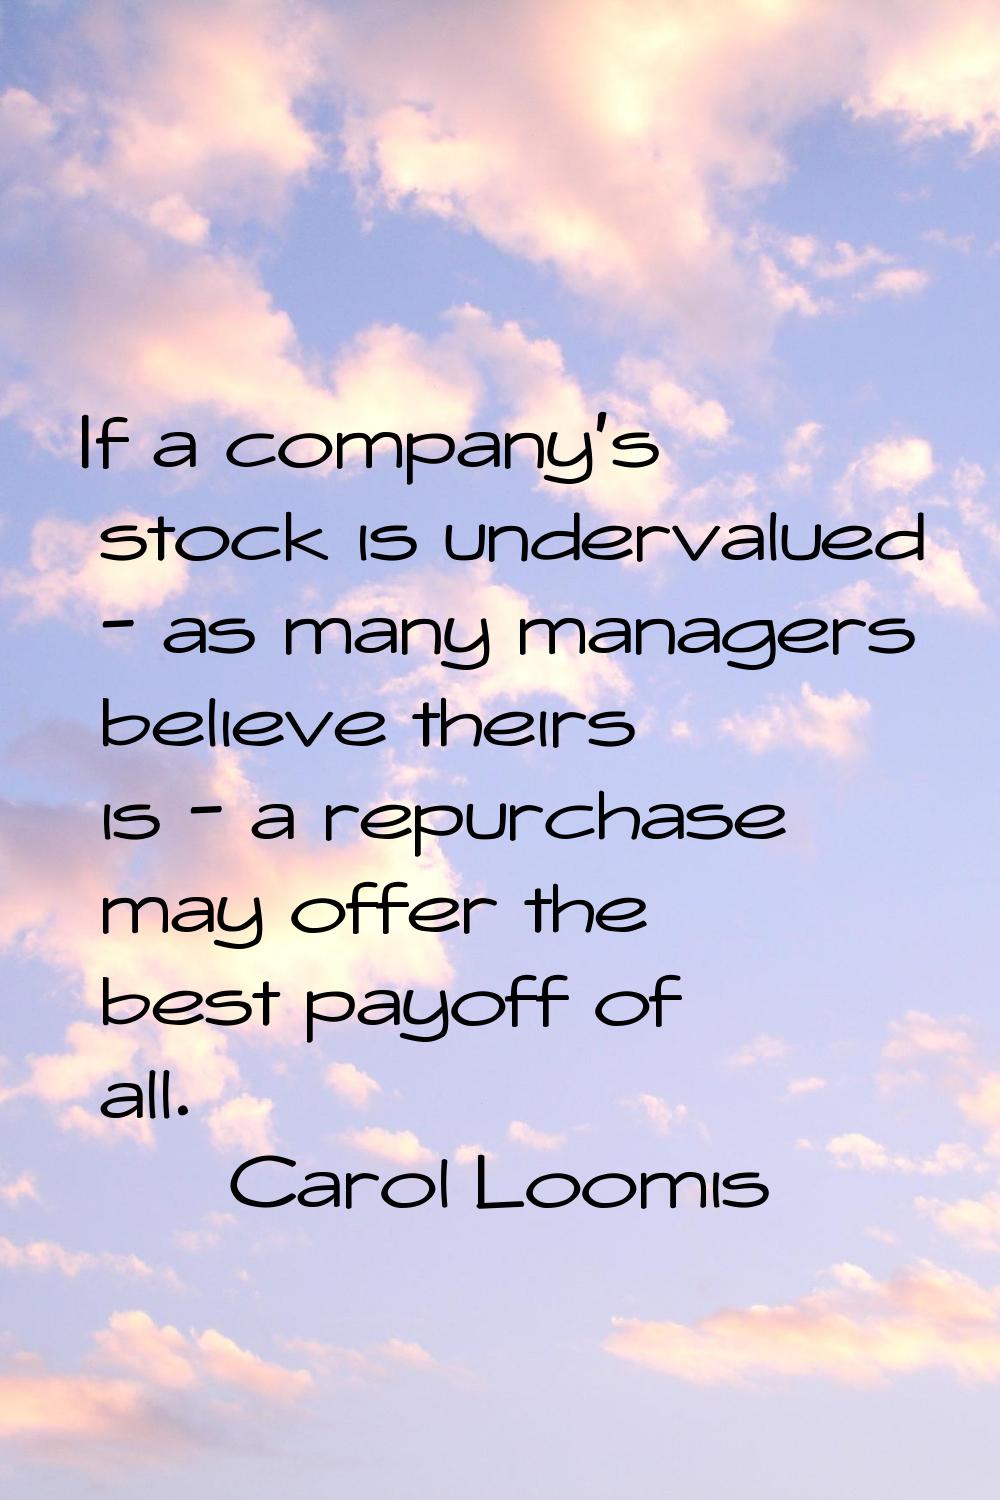 If a company's stock is undervalued - as many managers believe theirs is - a repurchase may offer t